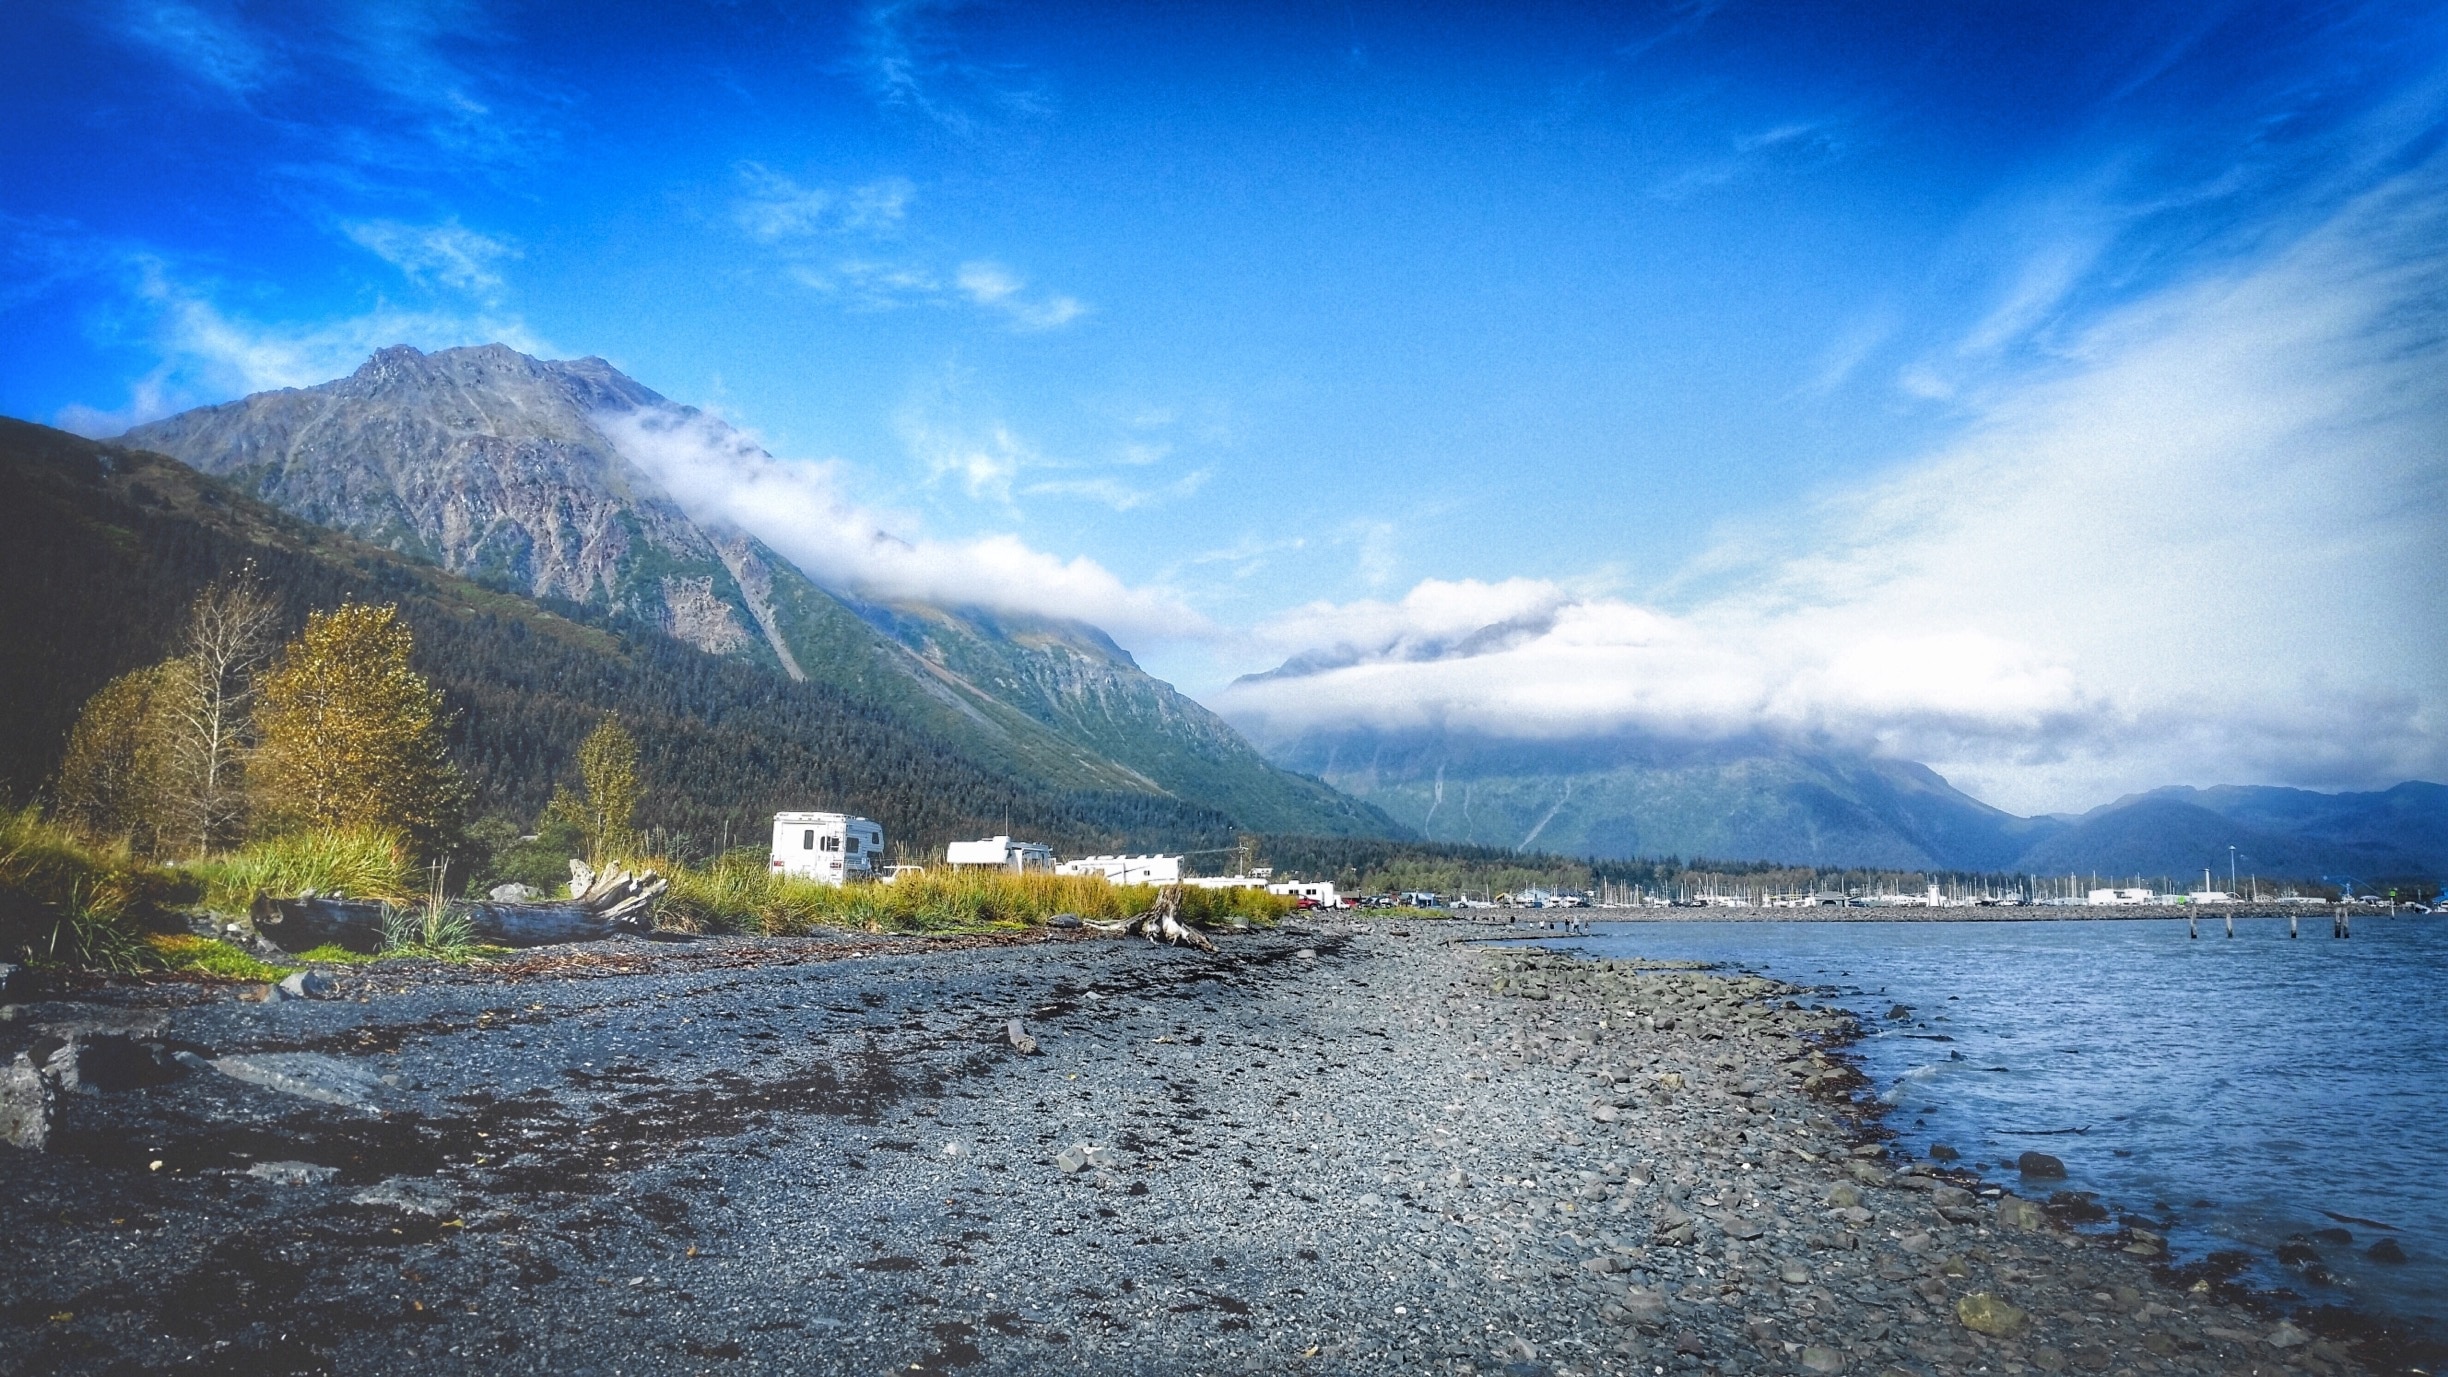 If you ever get the chance the small town of Seward Alaska is the perfect place to find a deserted beach, take in the scenery and never ever want to leave! 